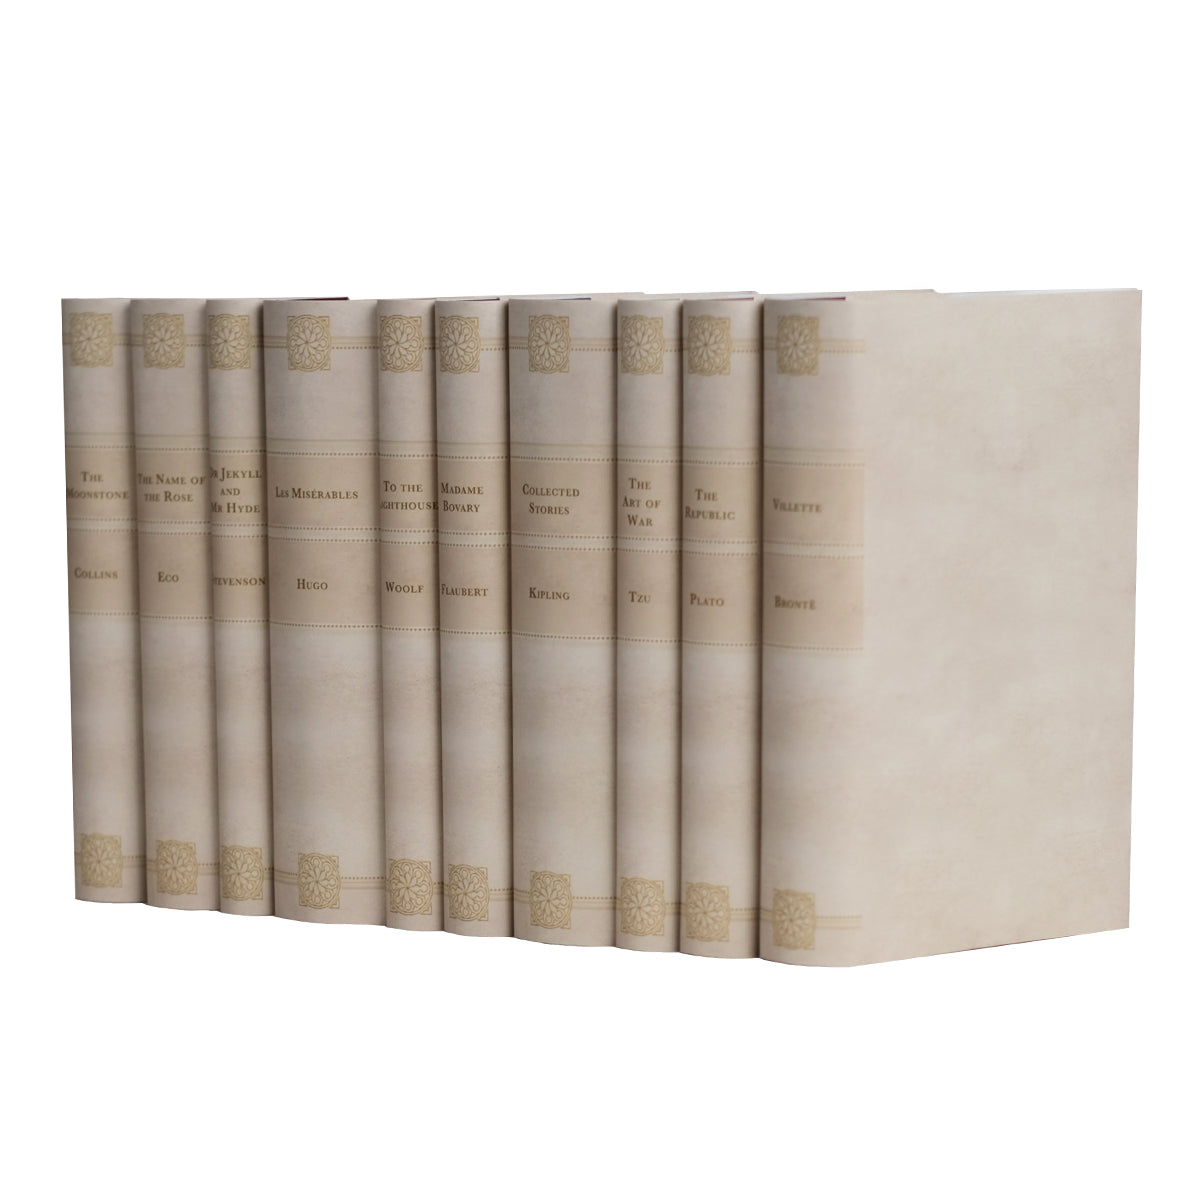 Everyman's Library Classics with Vellum-Style Jackets in Sets of 10